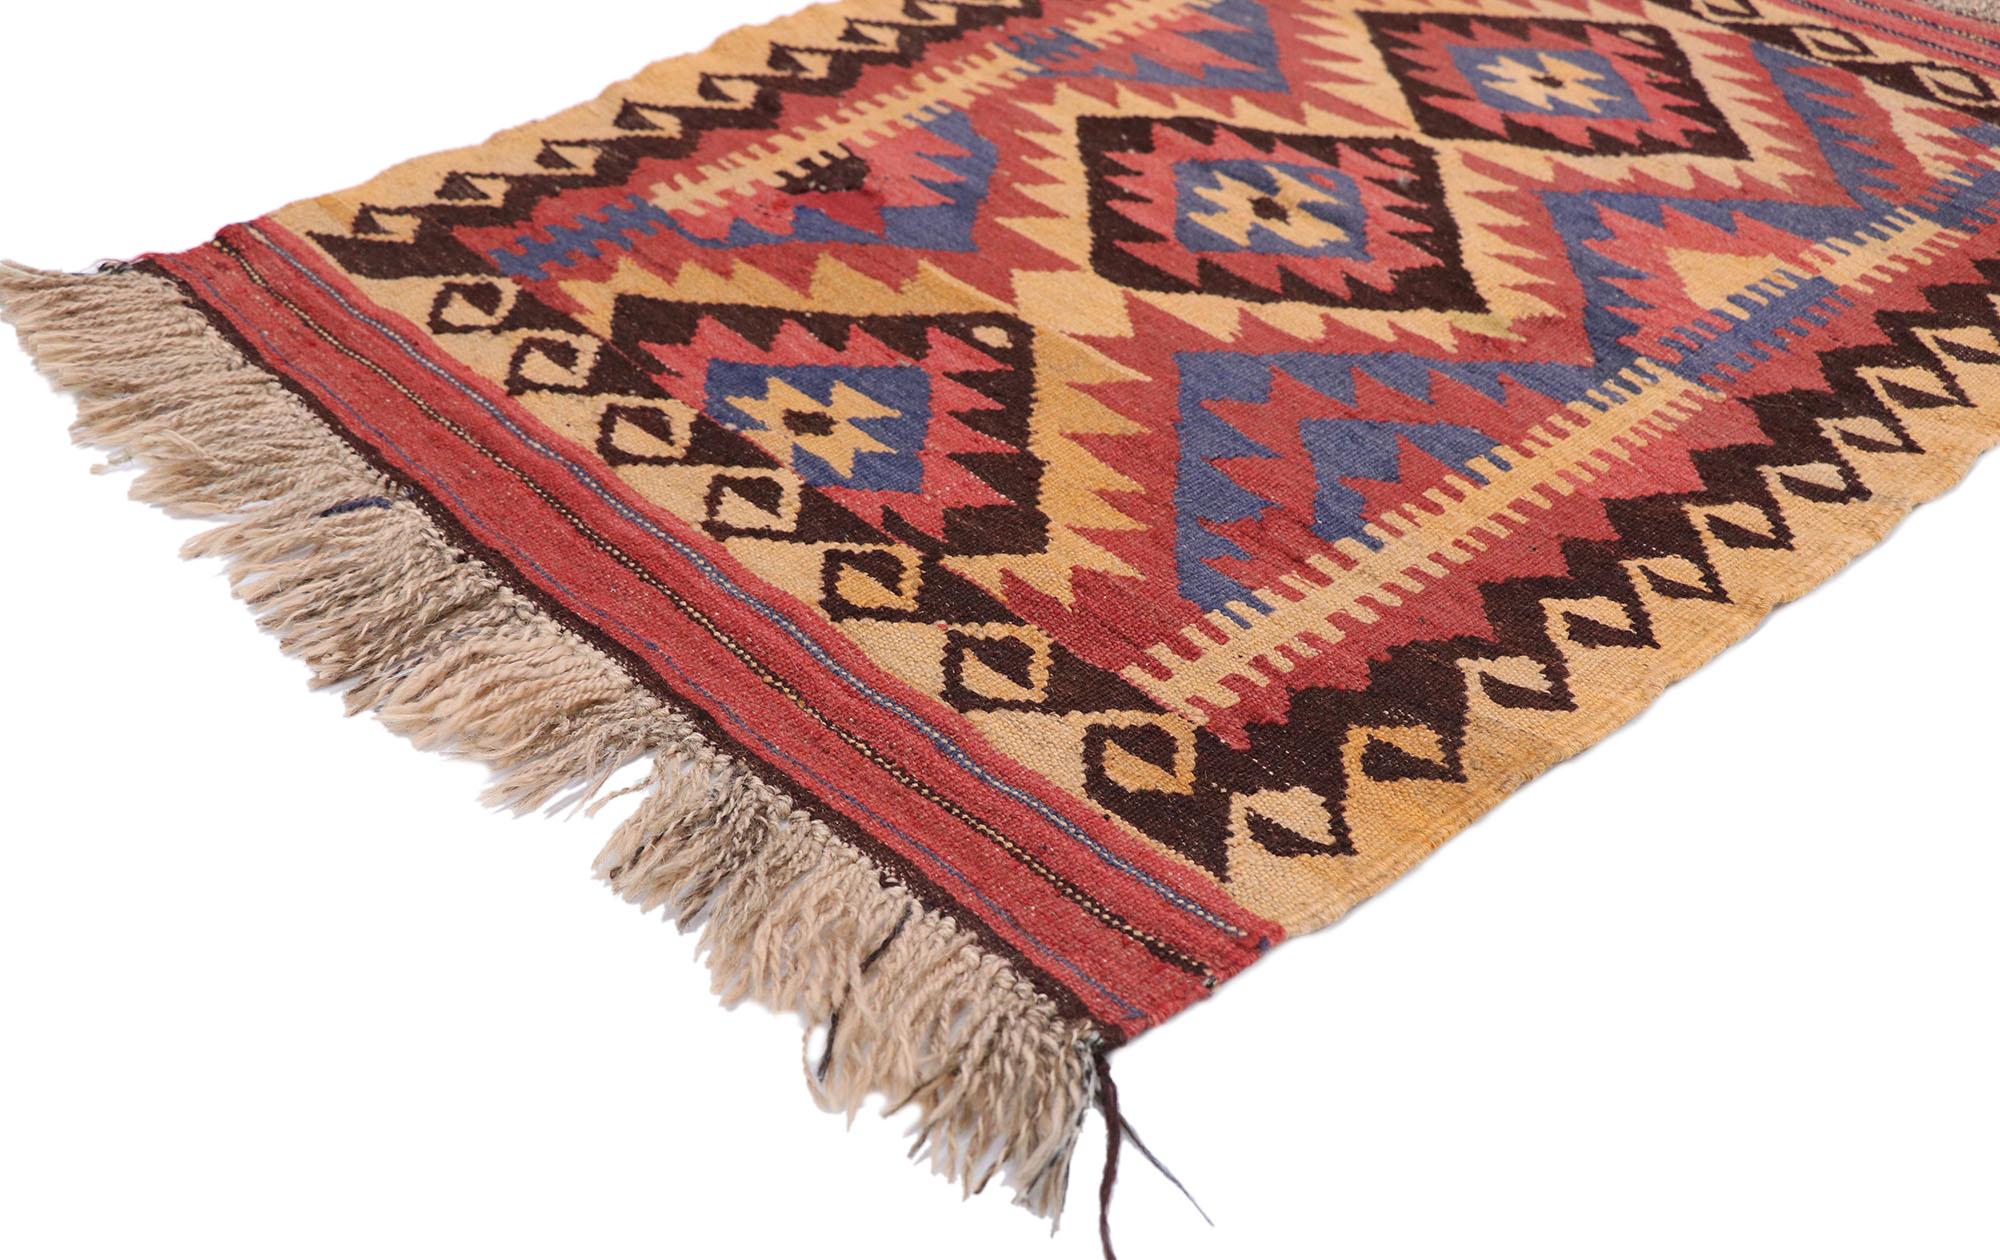 77882, vintage Afghani Maimana Kilim rug with Modern Tribal style. Full of tiny details and a bold expressive design combined with vibrant colors and tribal style, this hand-woven wool vintage Afghani Maimana kilim rug is a captivating vision of